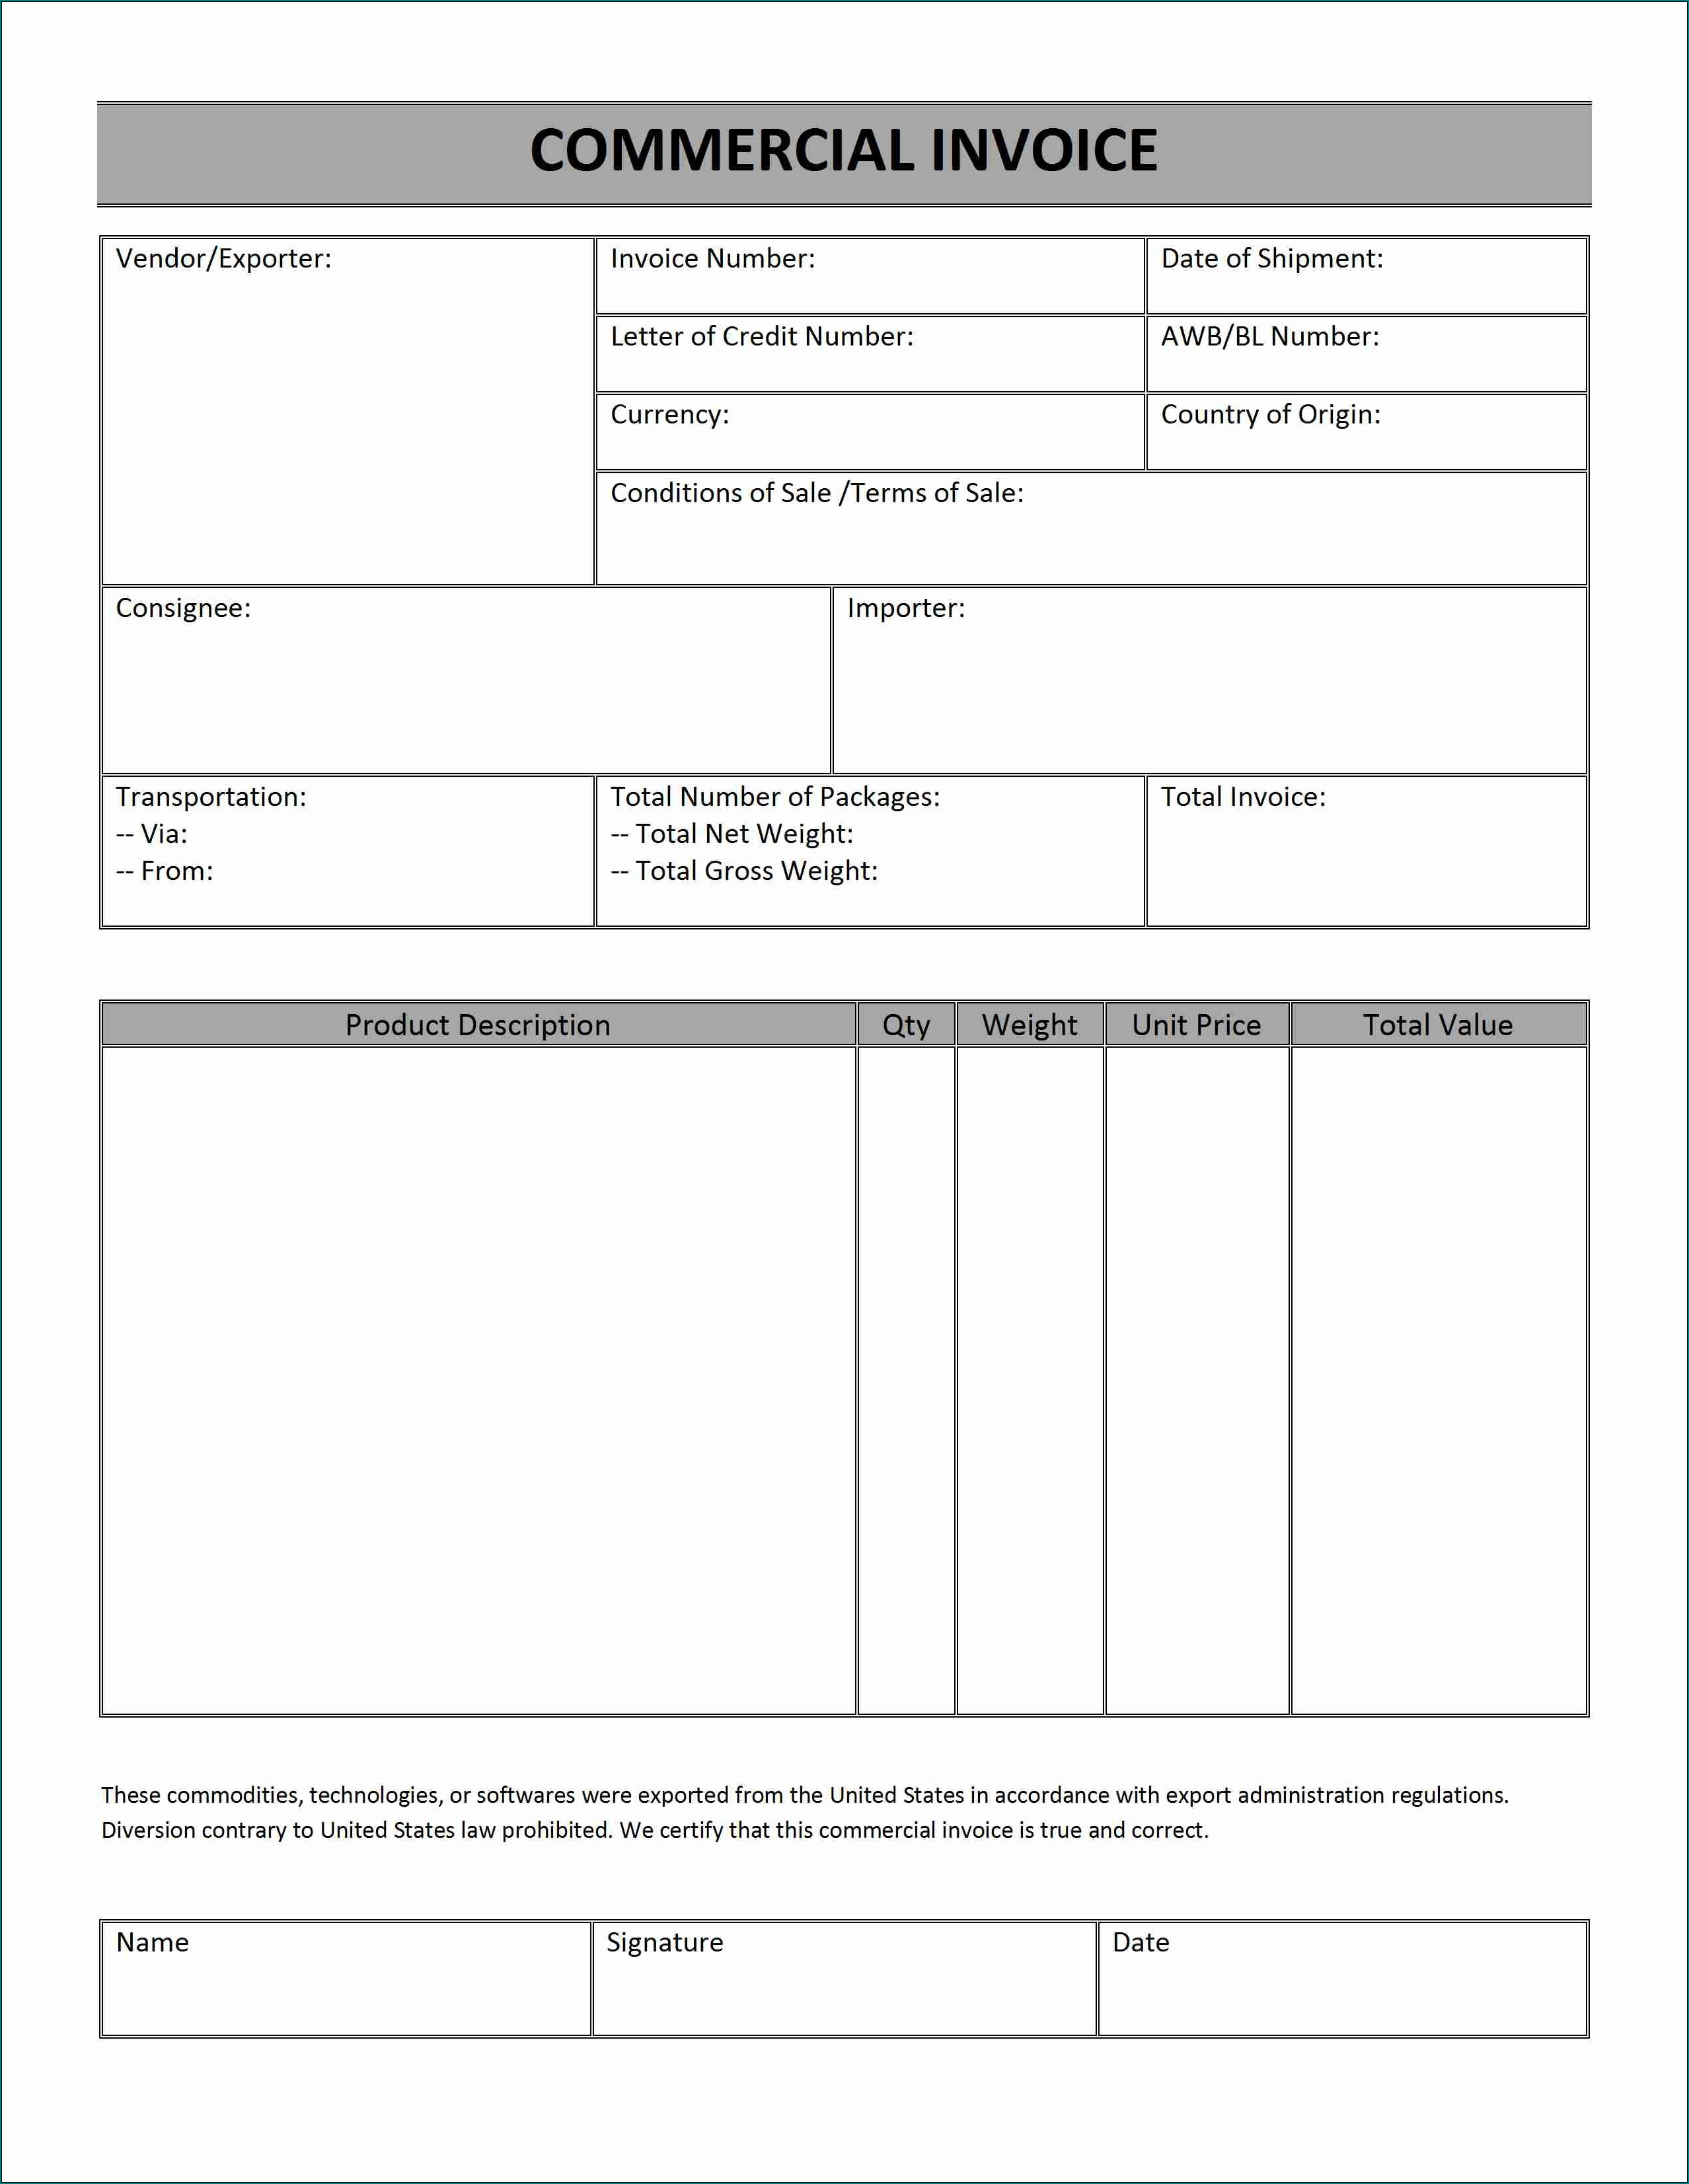 Example of Commercial Invoice Template